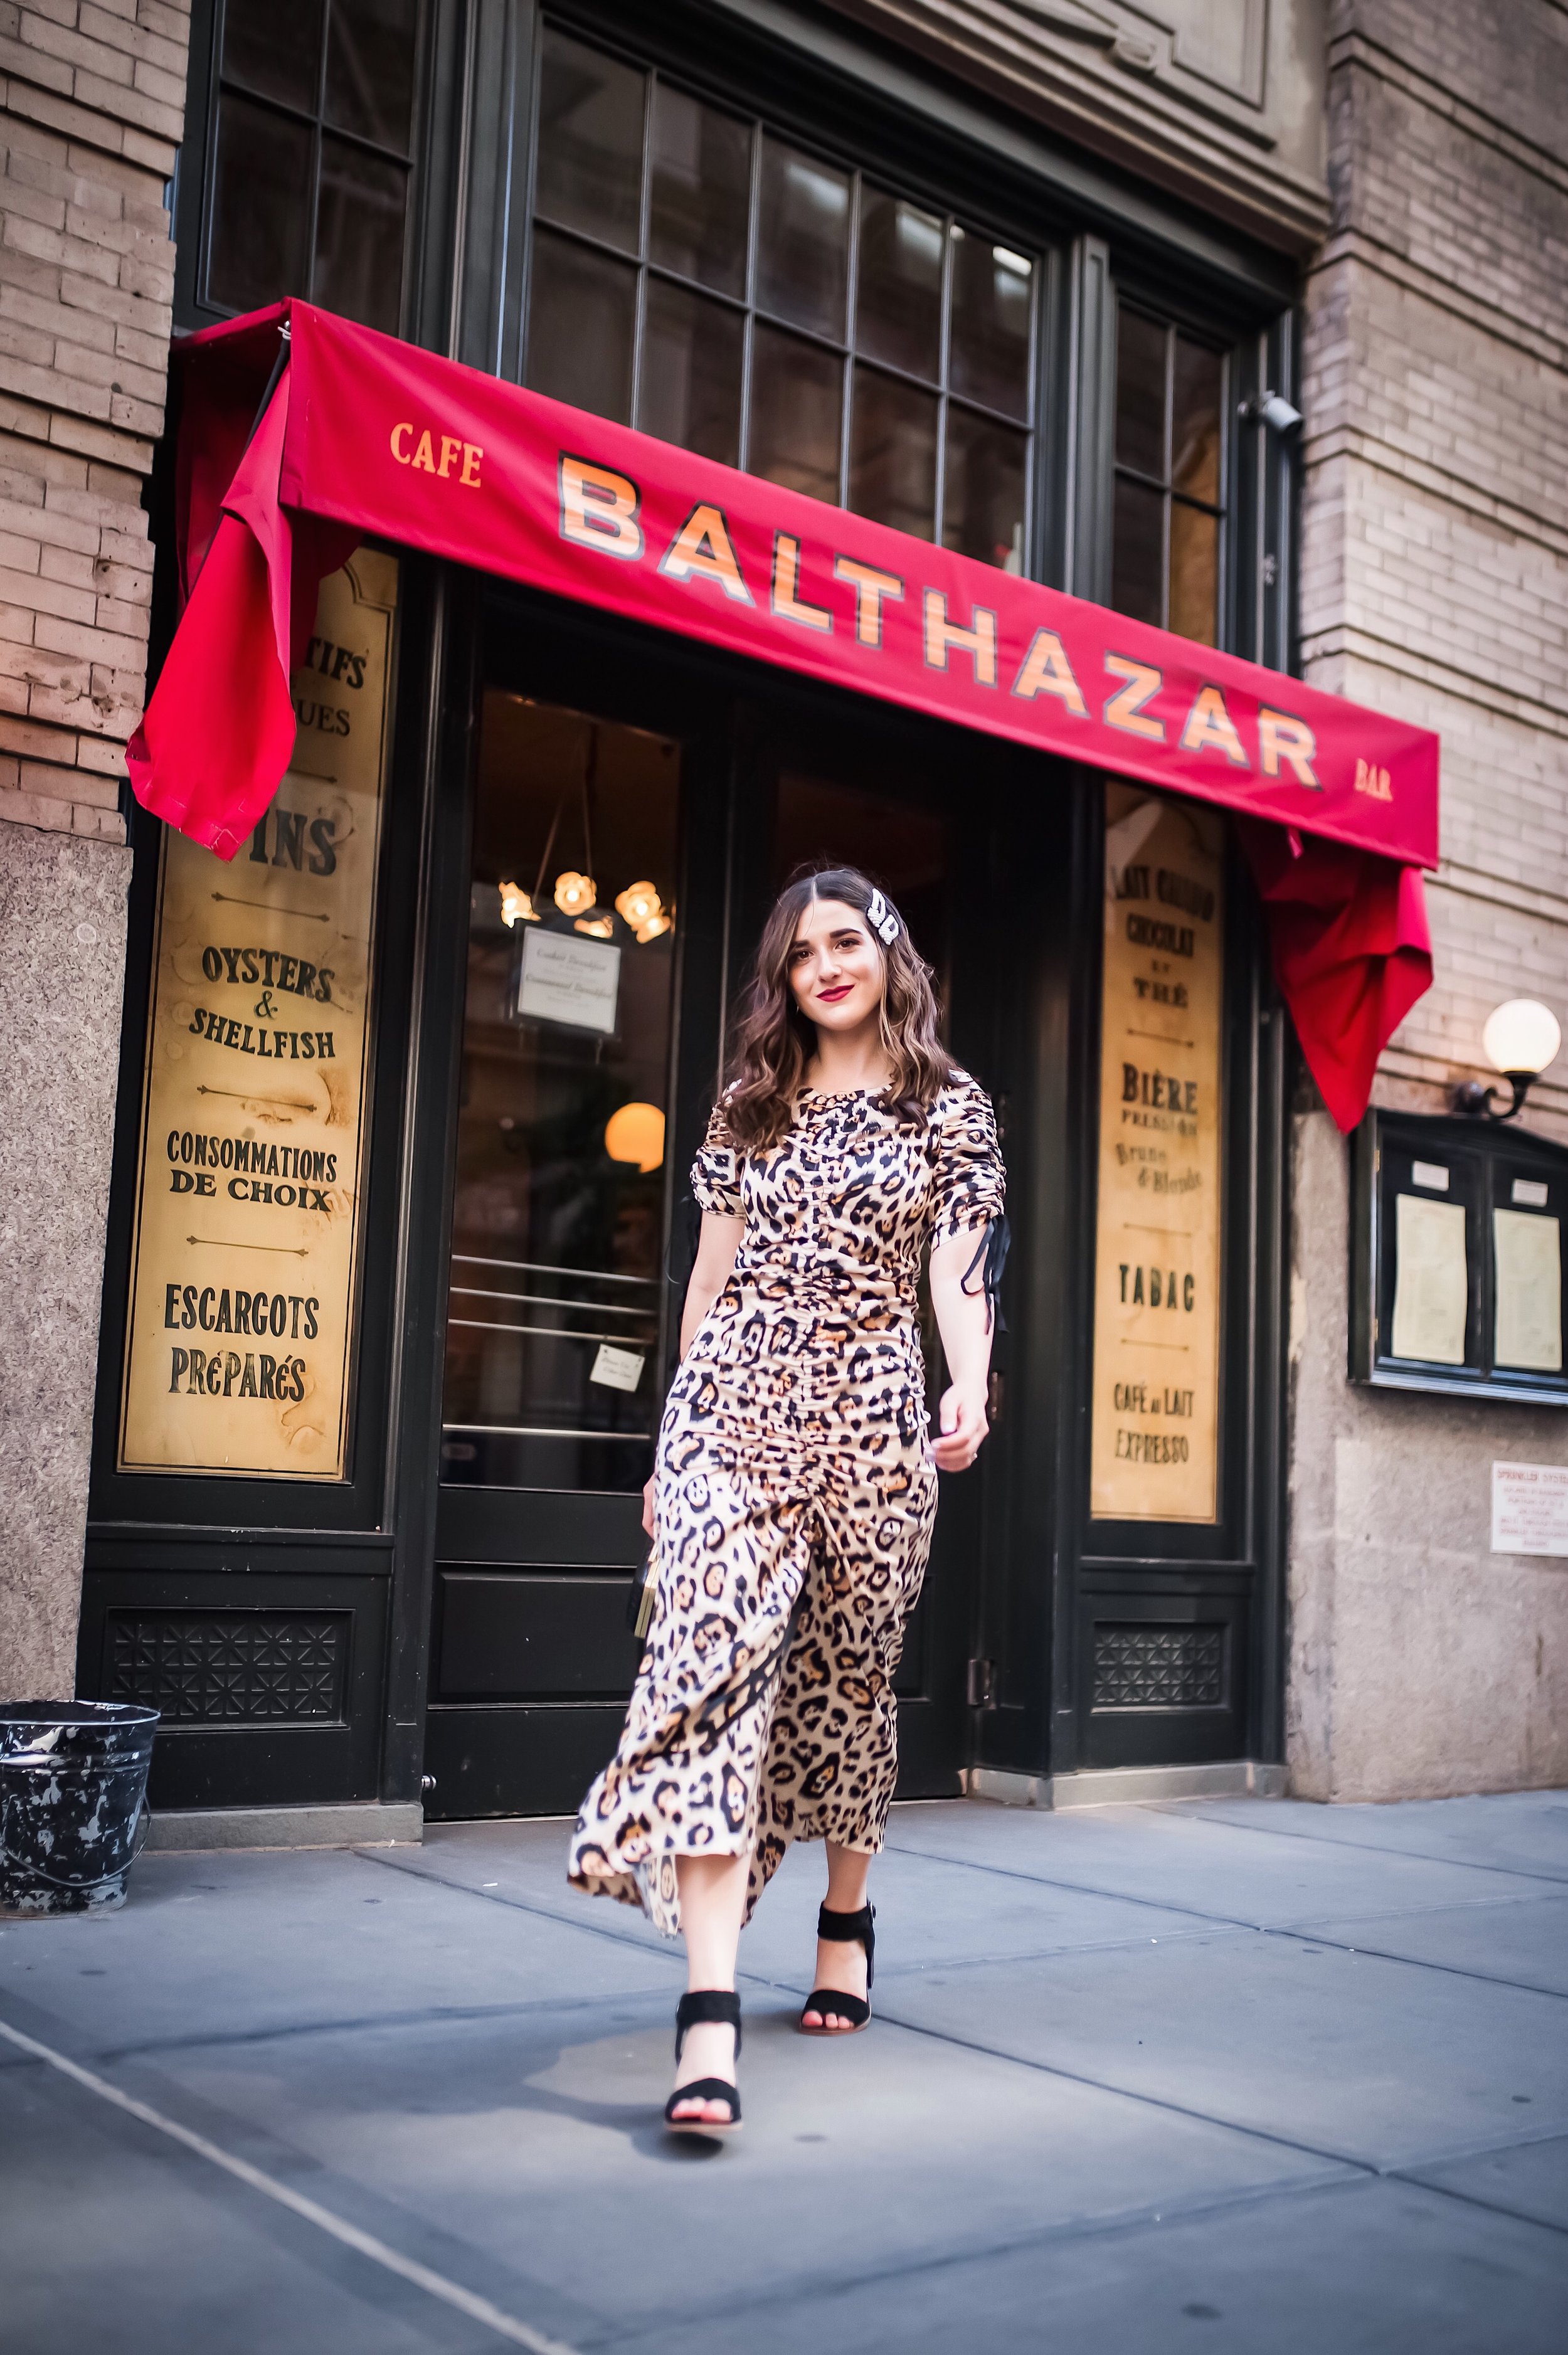 July 3 2019 Leopard Dress Pearl Hair Clips Esther Santer Fashion Blog NYC Street Style Blogger Outfit OOTD Trendy Shopping Girl What How To Wear Cheetah Black Braided Sandals Vince Camuto Balthazar Restaurant New York City Clothing Soho Photoshoot Bag.jpg